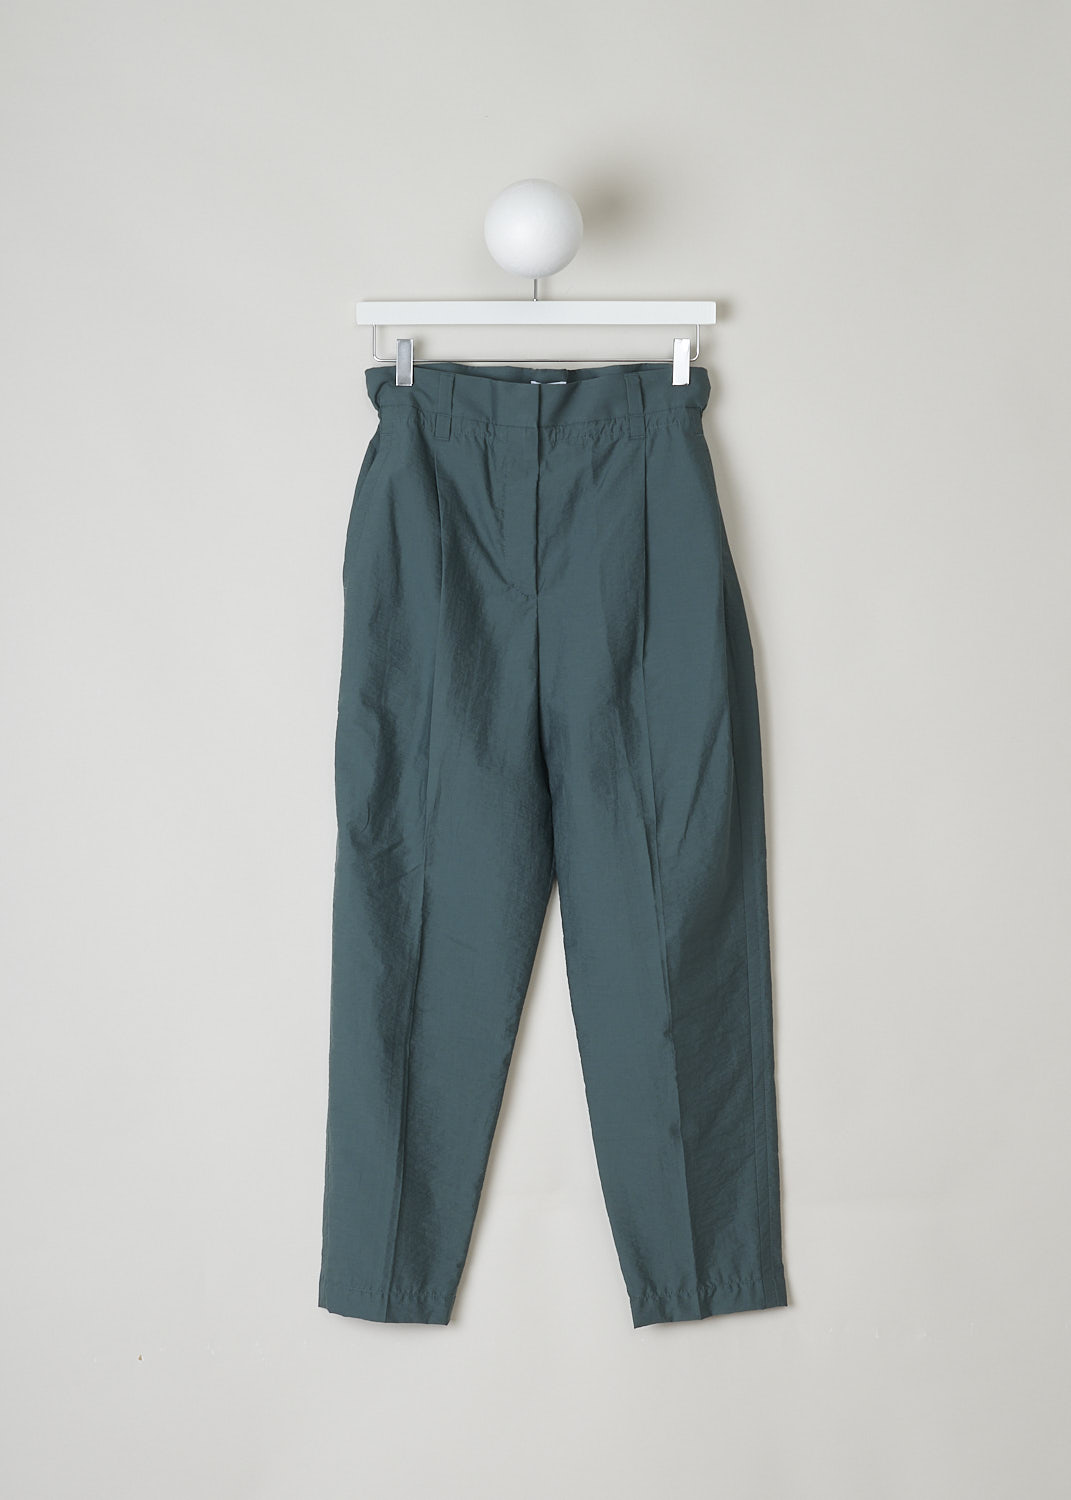 BRUNELLO CUCINELLI, TEAL GREEN PAPER BAG PANTS, M0F79P7102_C7287, Green, Blue, Front, These teal green pants have a paper bag waist with belt loops.  The waistline is partly elasticated. The concealed press studs and zip function as the closure option. These pants have slanted pockets in the front and welt pockets in the back. The tapered pant legs have a centre crease. 
